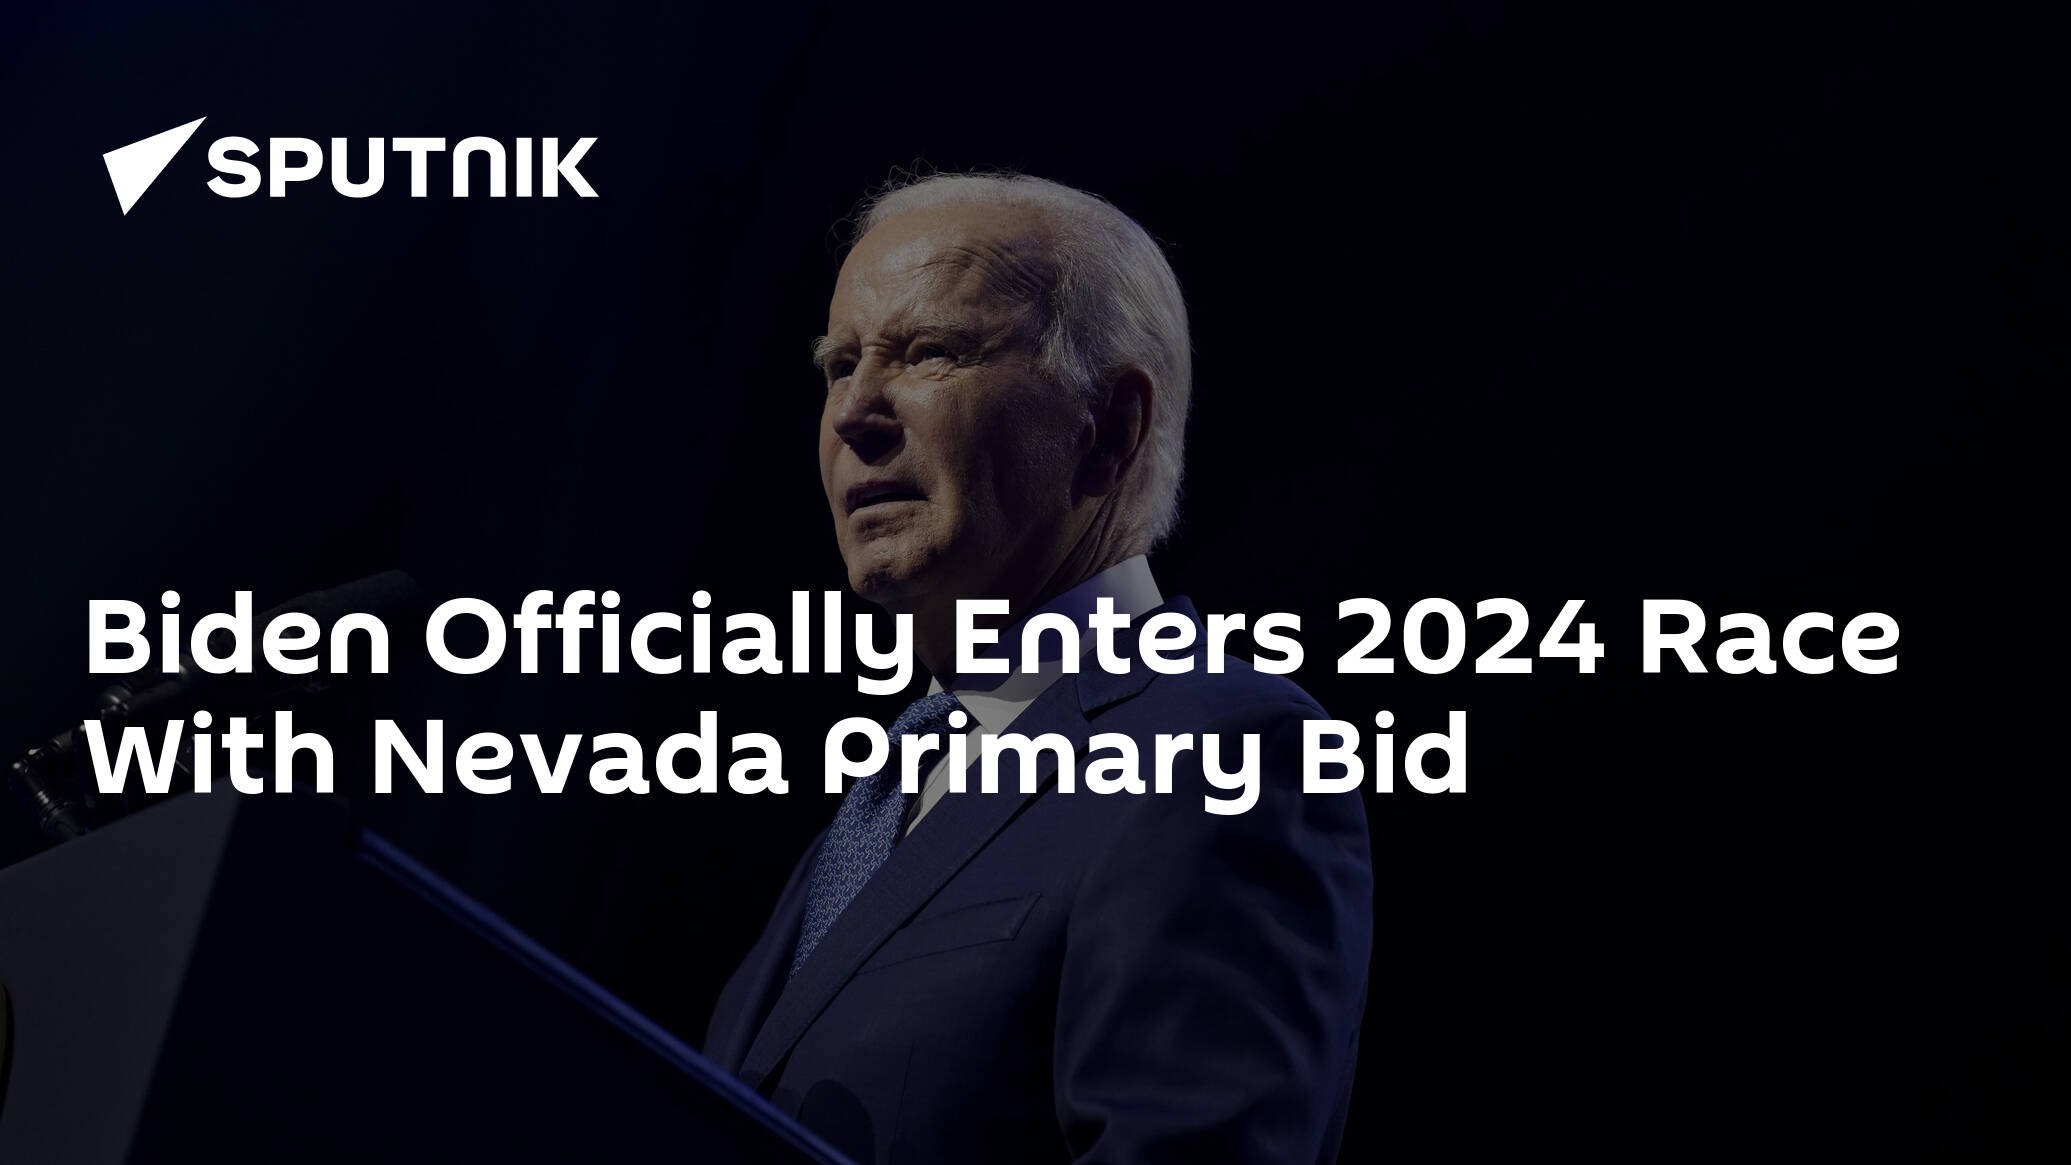 Biden Officially Enters 2024 Race With Nevada Primary Bid